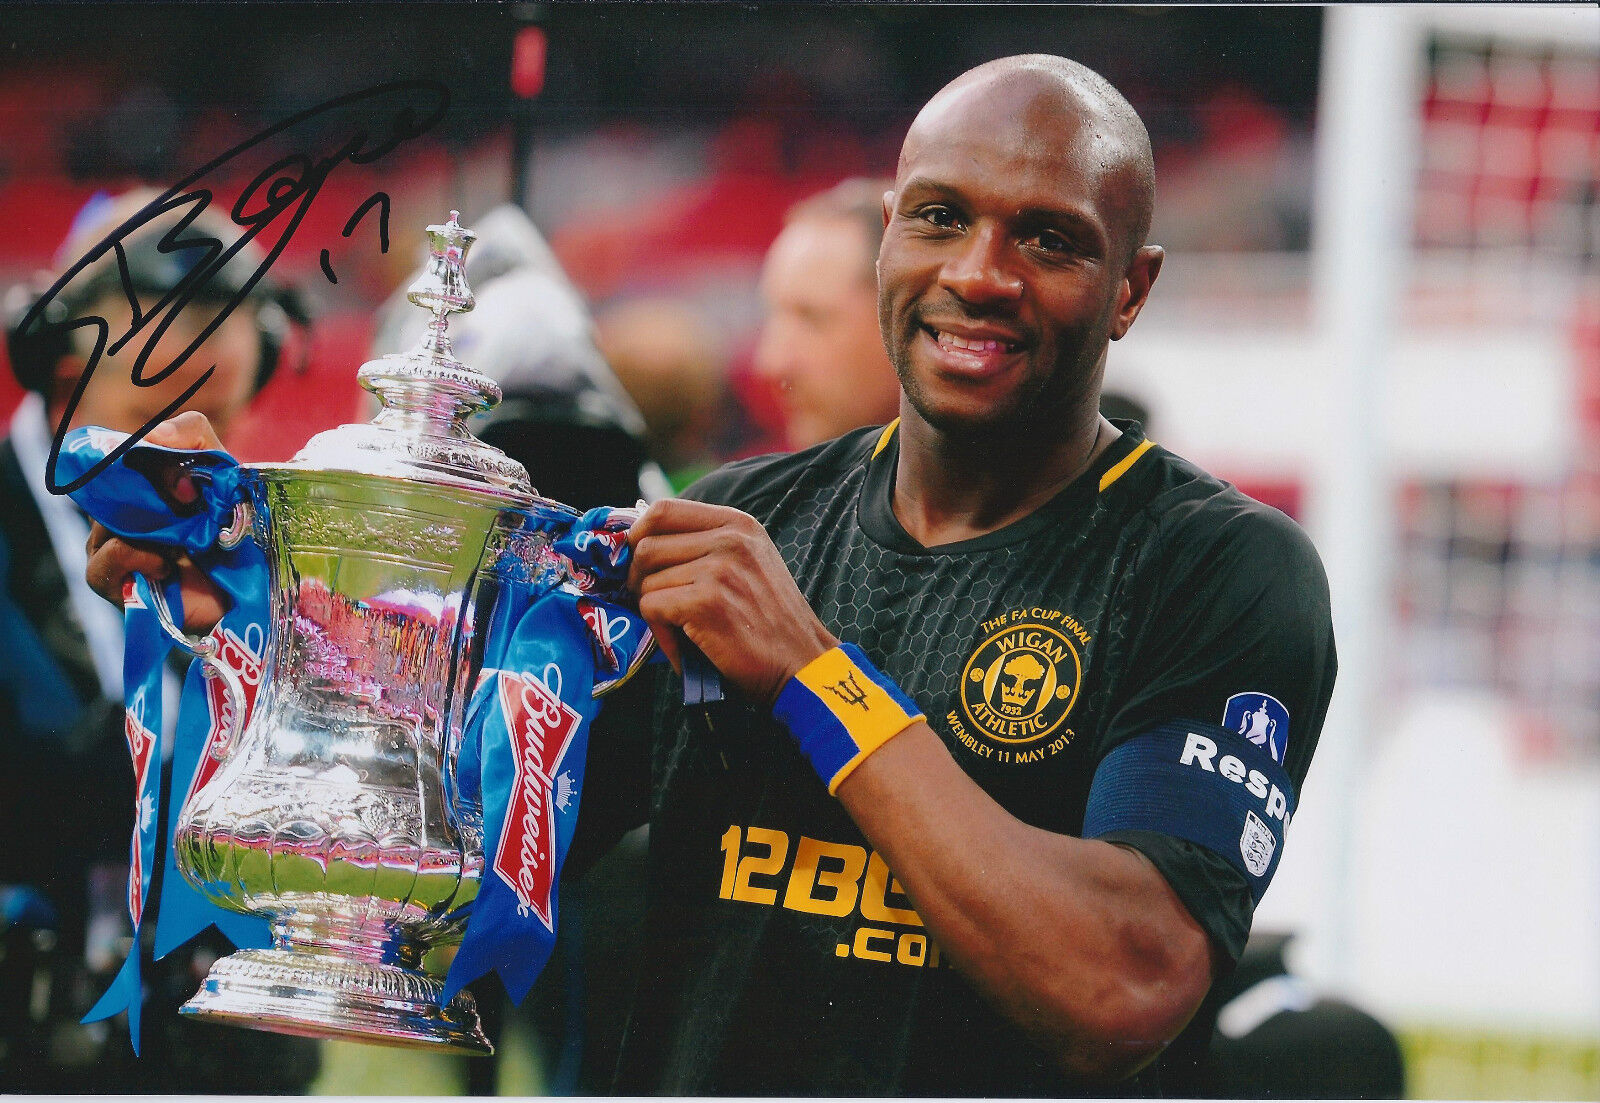 Emmerson BOYCE SIGNED Autograph 12x8 Photo Poster painting AFTAL COA WIGAN Athletic FA Cup WIN